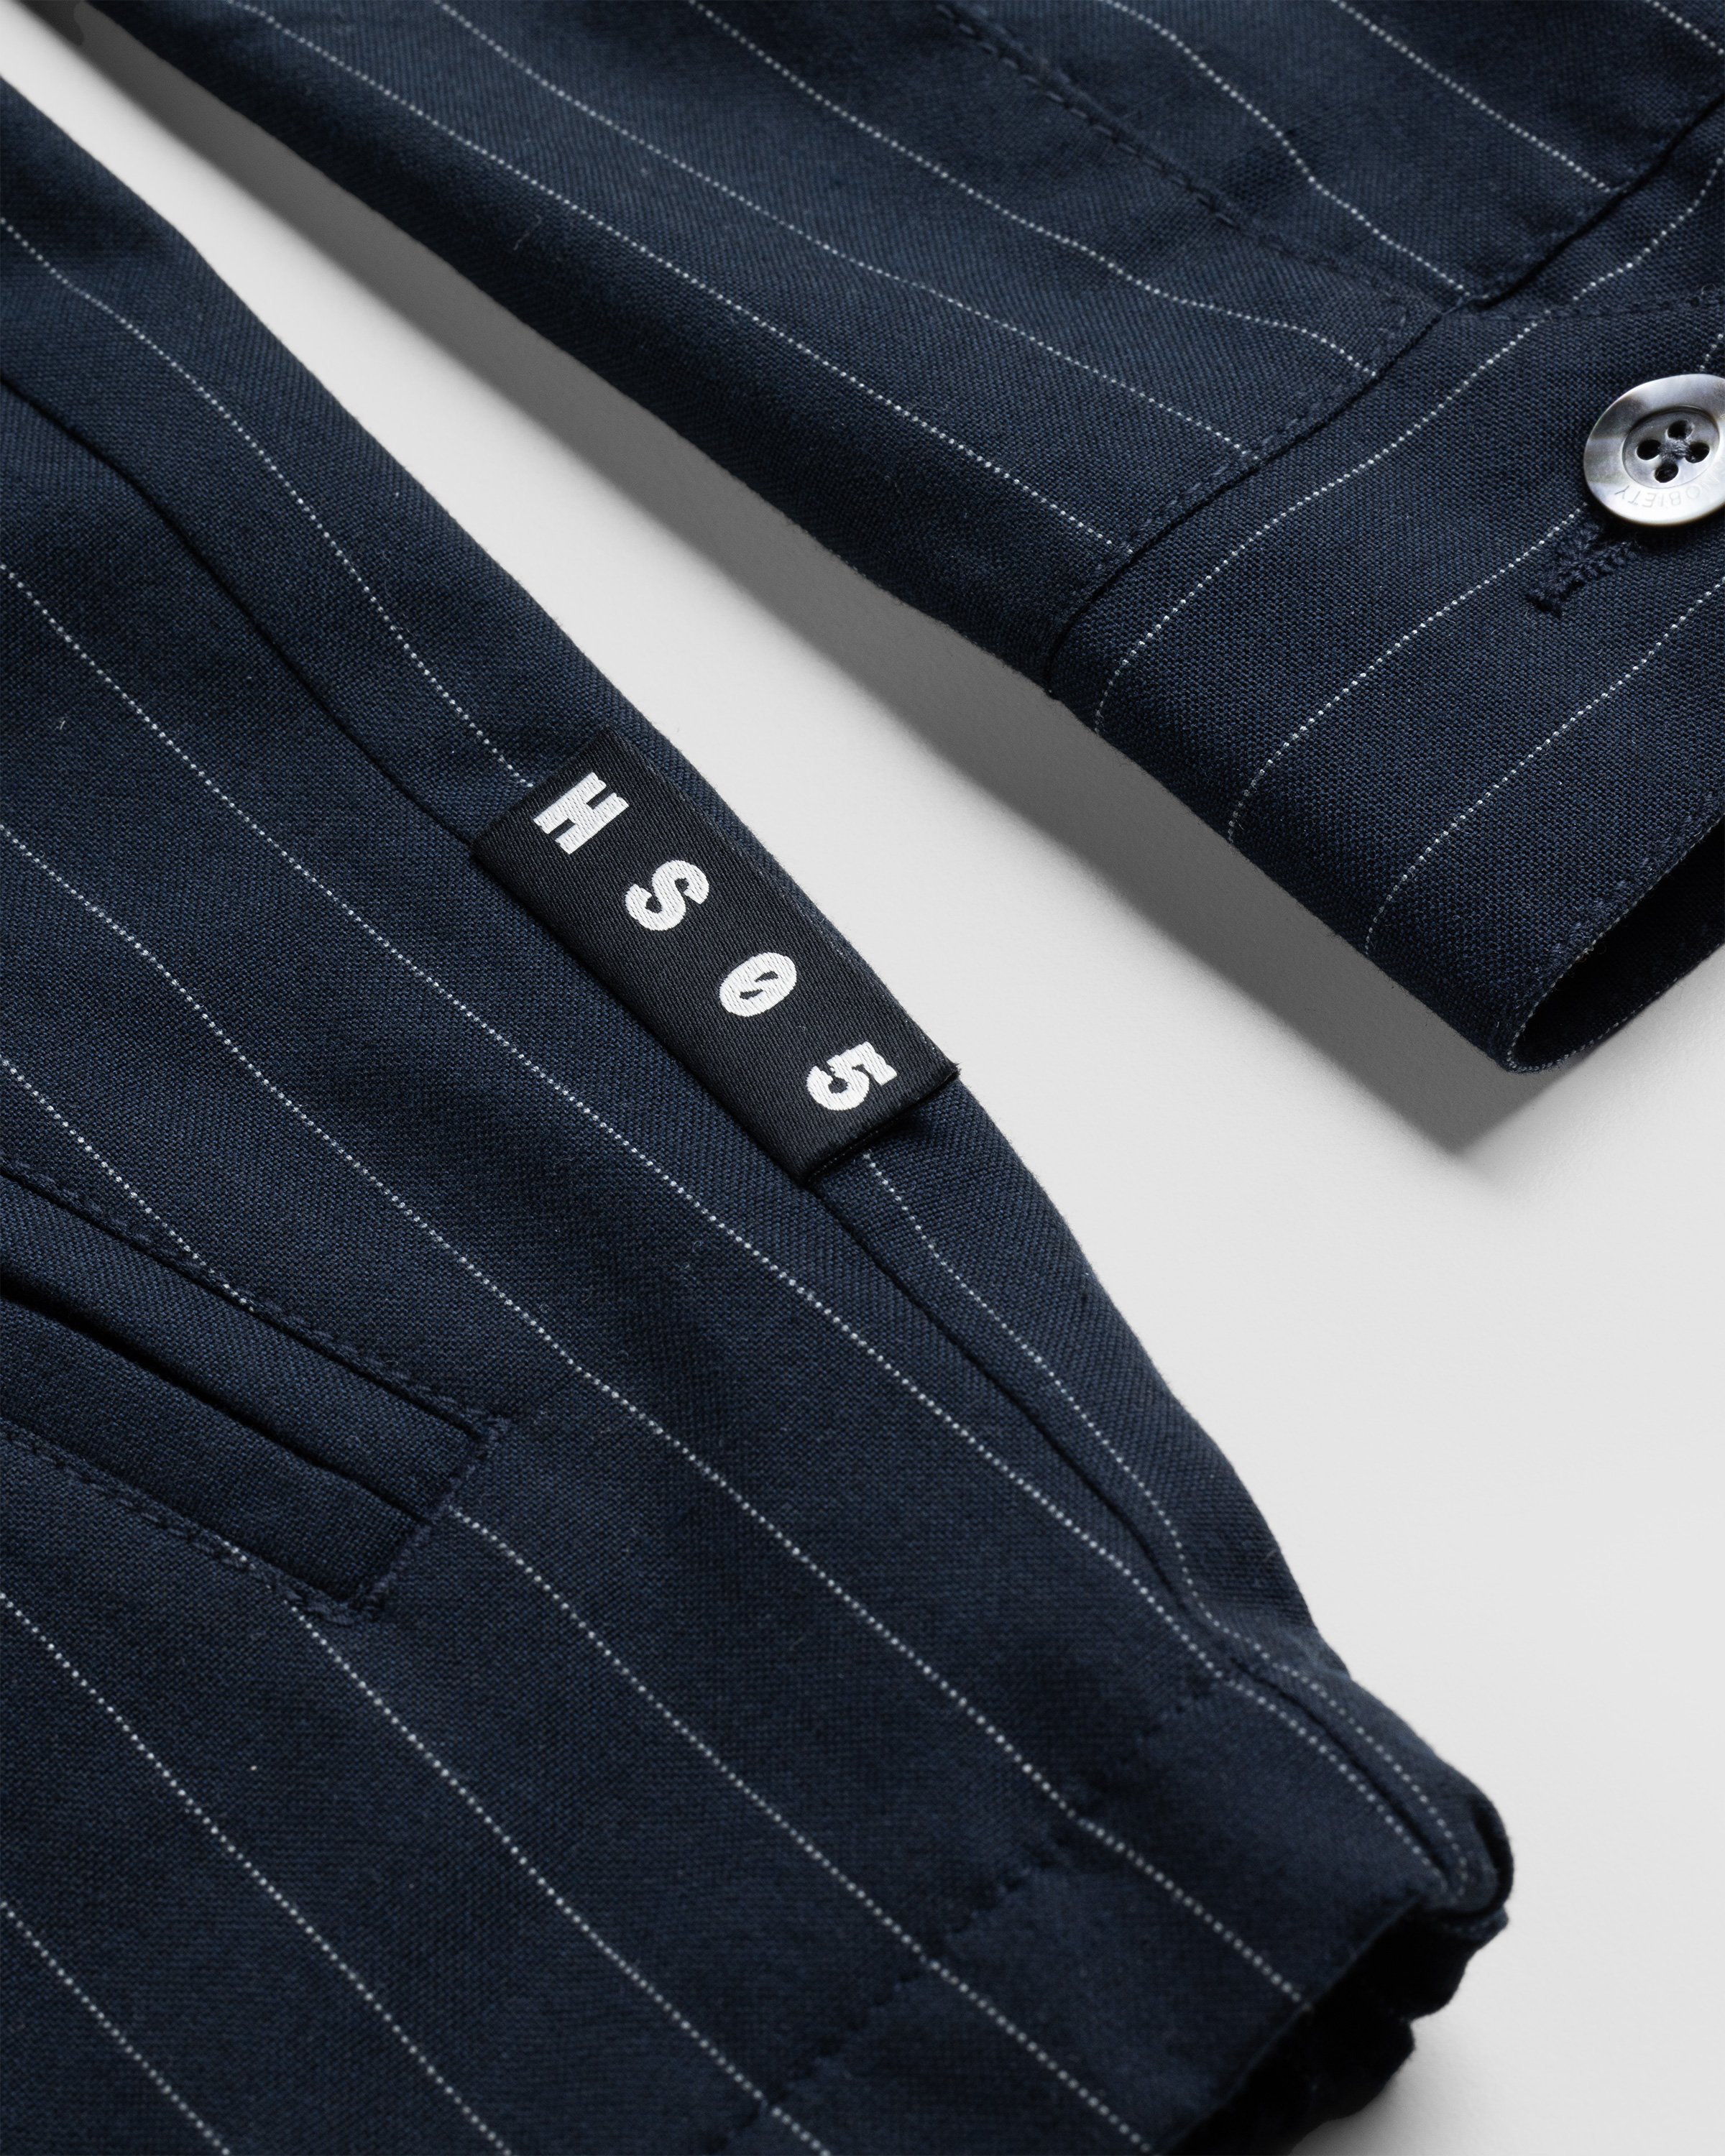 Highsnobiety HS05 - Tropical Suiting Jacket Stripes Navy - Clothing - Stripes Navy - Image 8